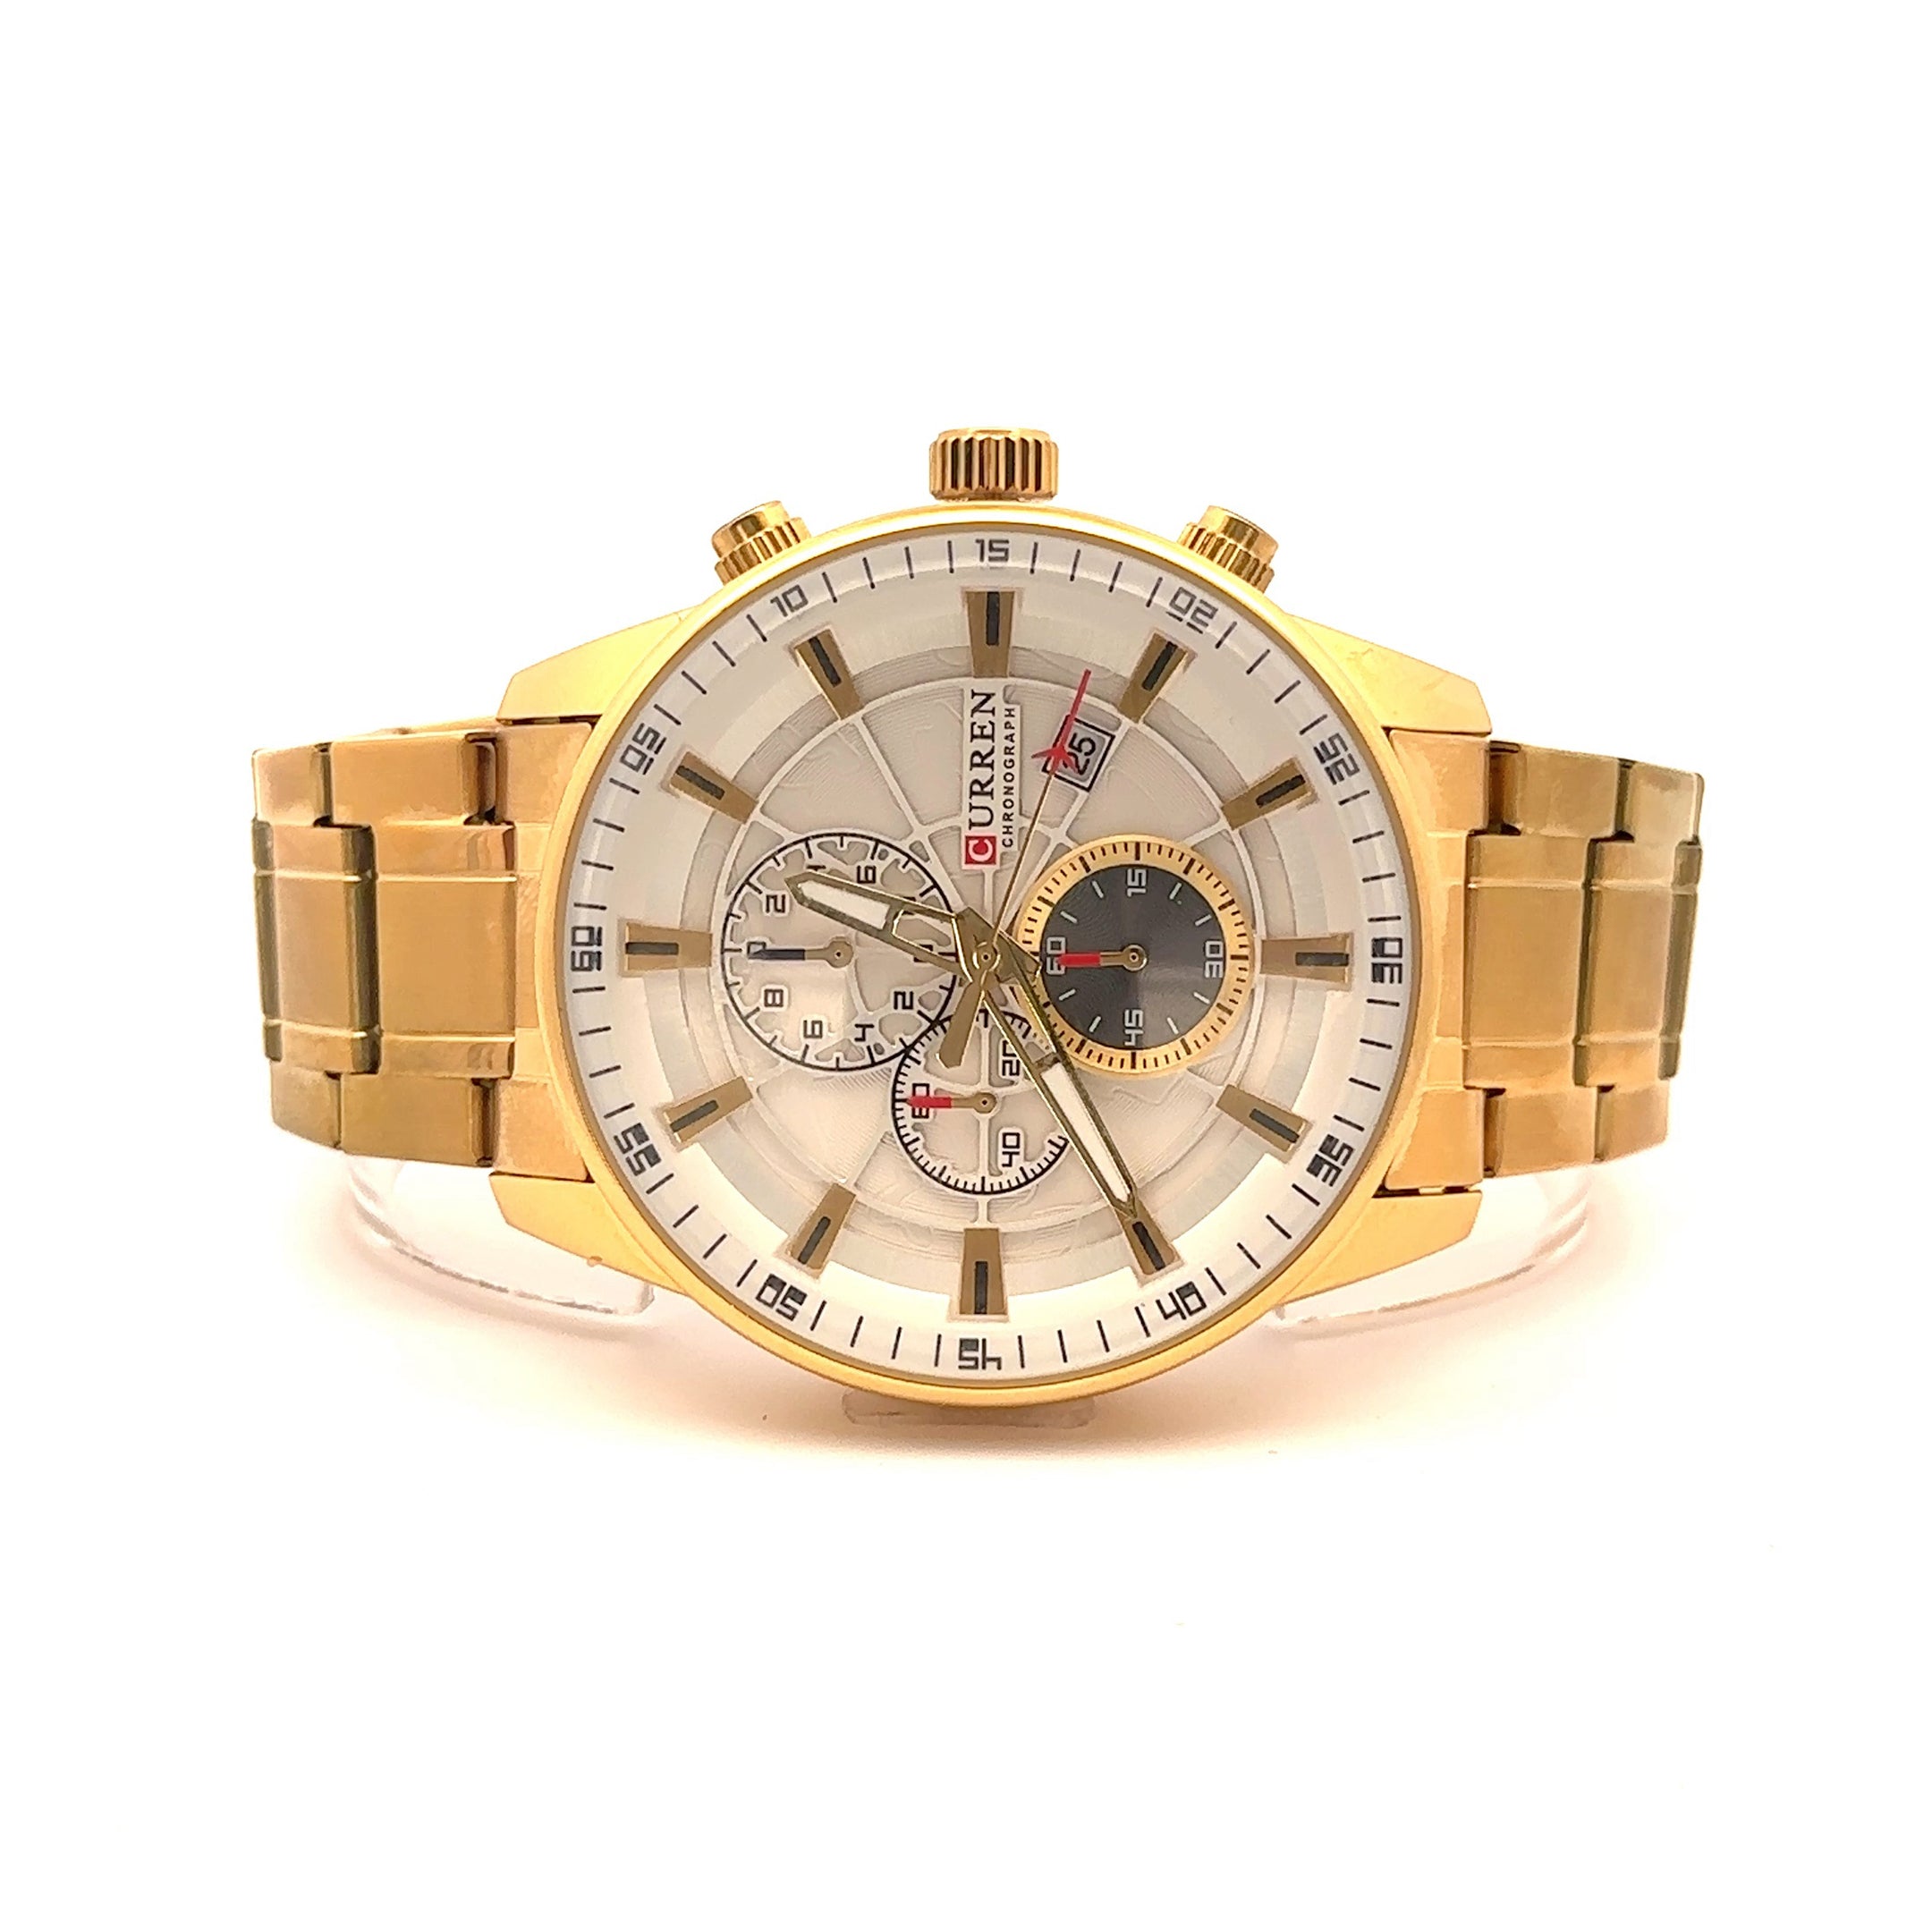 QUIXOTIC METAL BACK GOLD STAINLESS ICED OUT WATCH I 551742